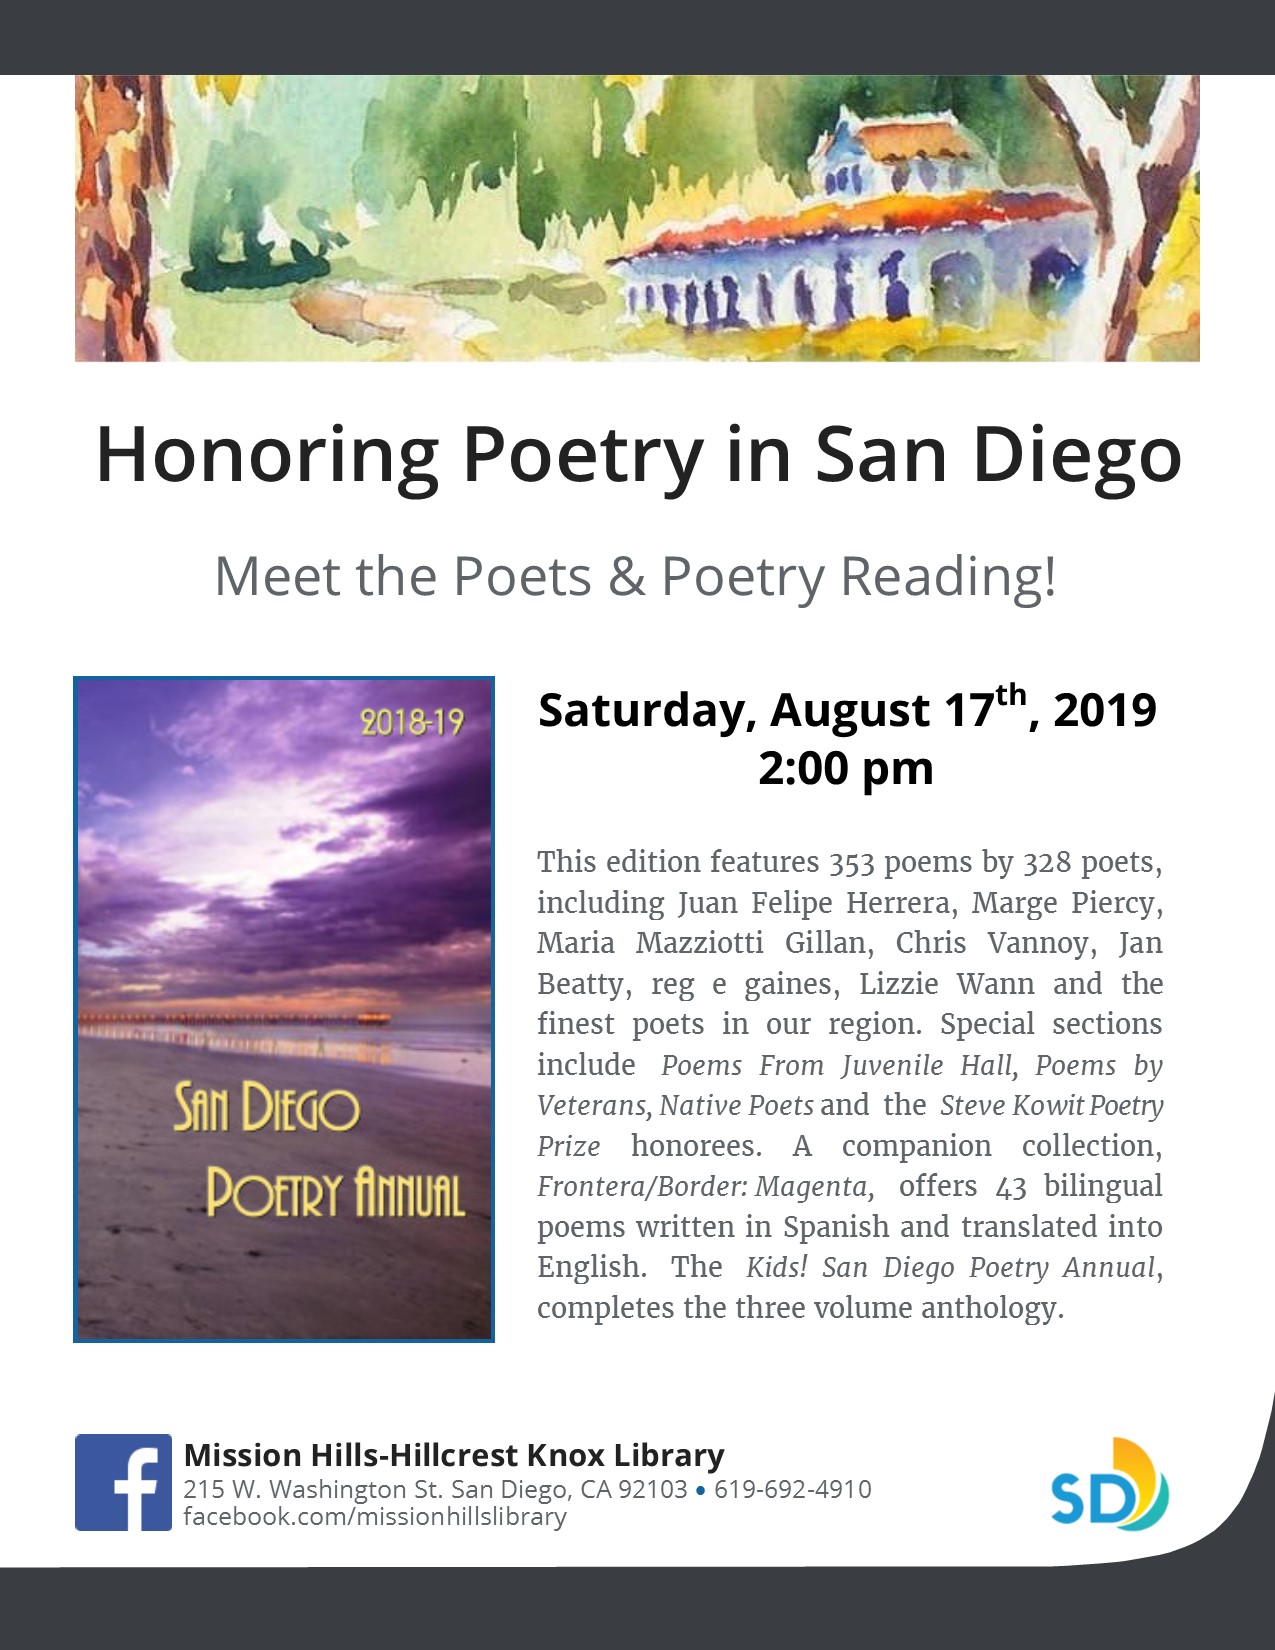 Cover of San Diego Poetry Annual Book and Description of Event